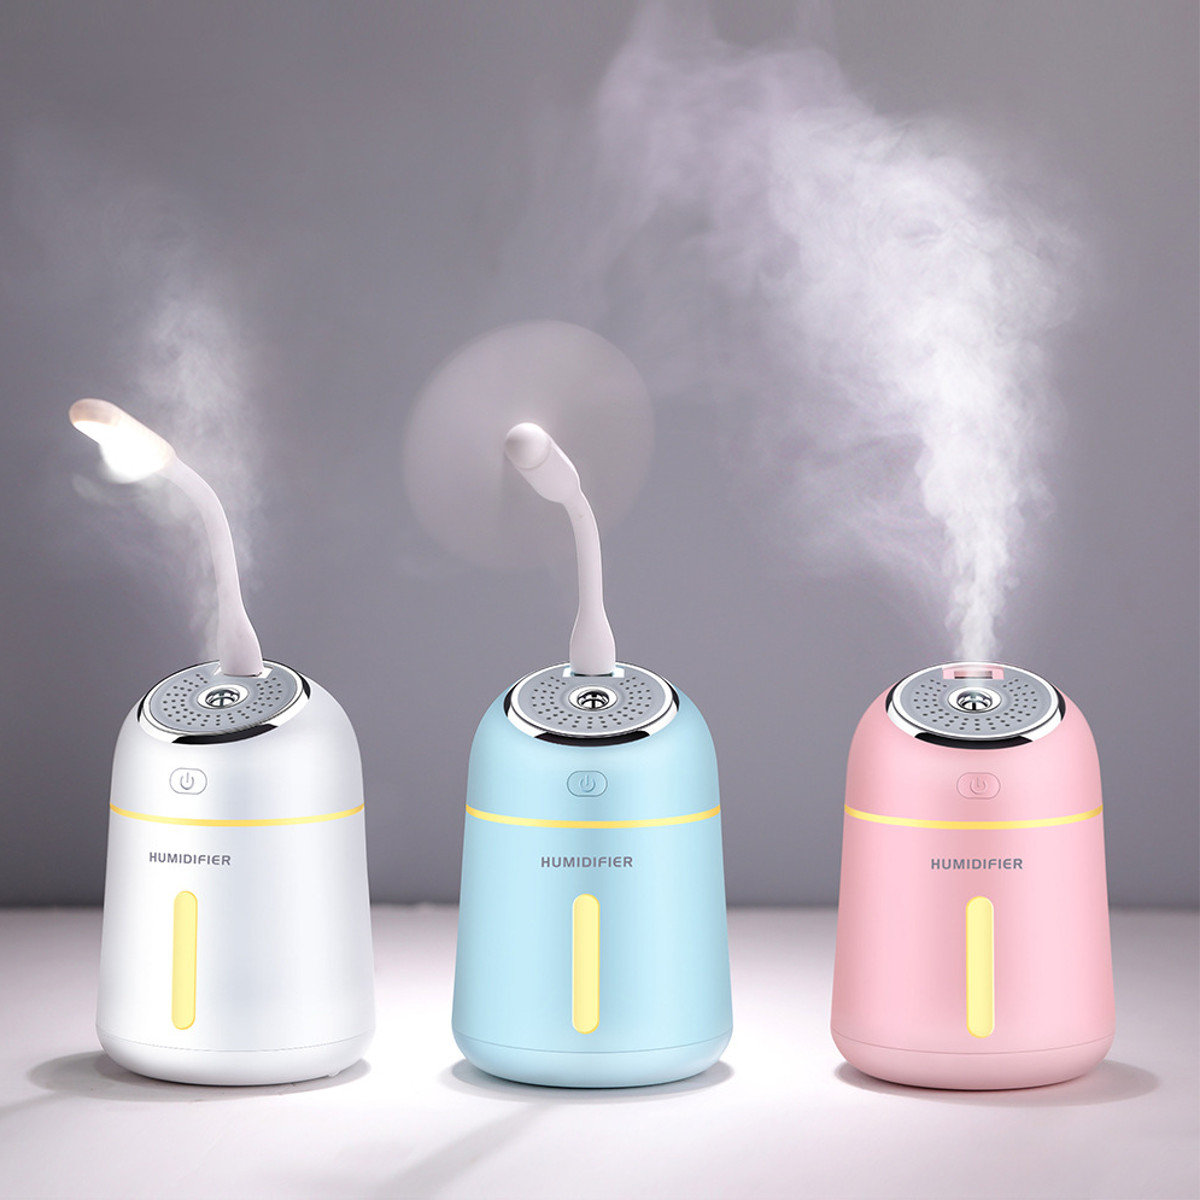 

4 In 1 Multi-Function Aroma Essential Oil Diffuser USB Fan LED Lamp Desktop Air Humidifier, Blue;pink